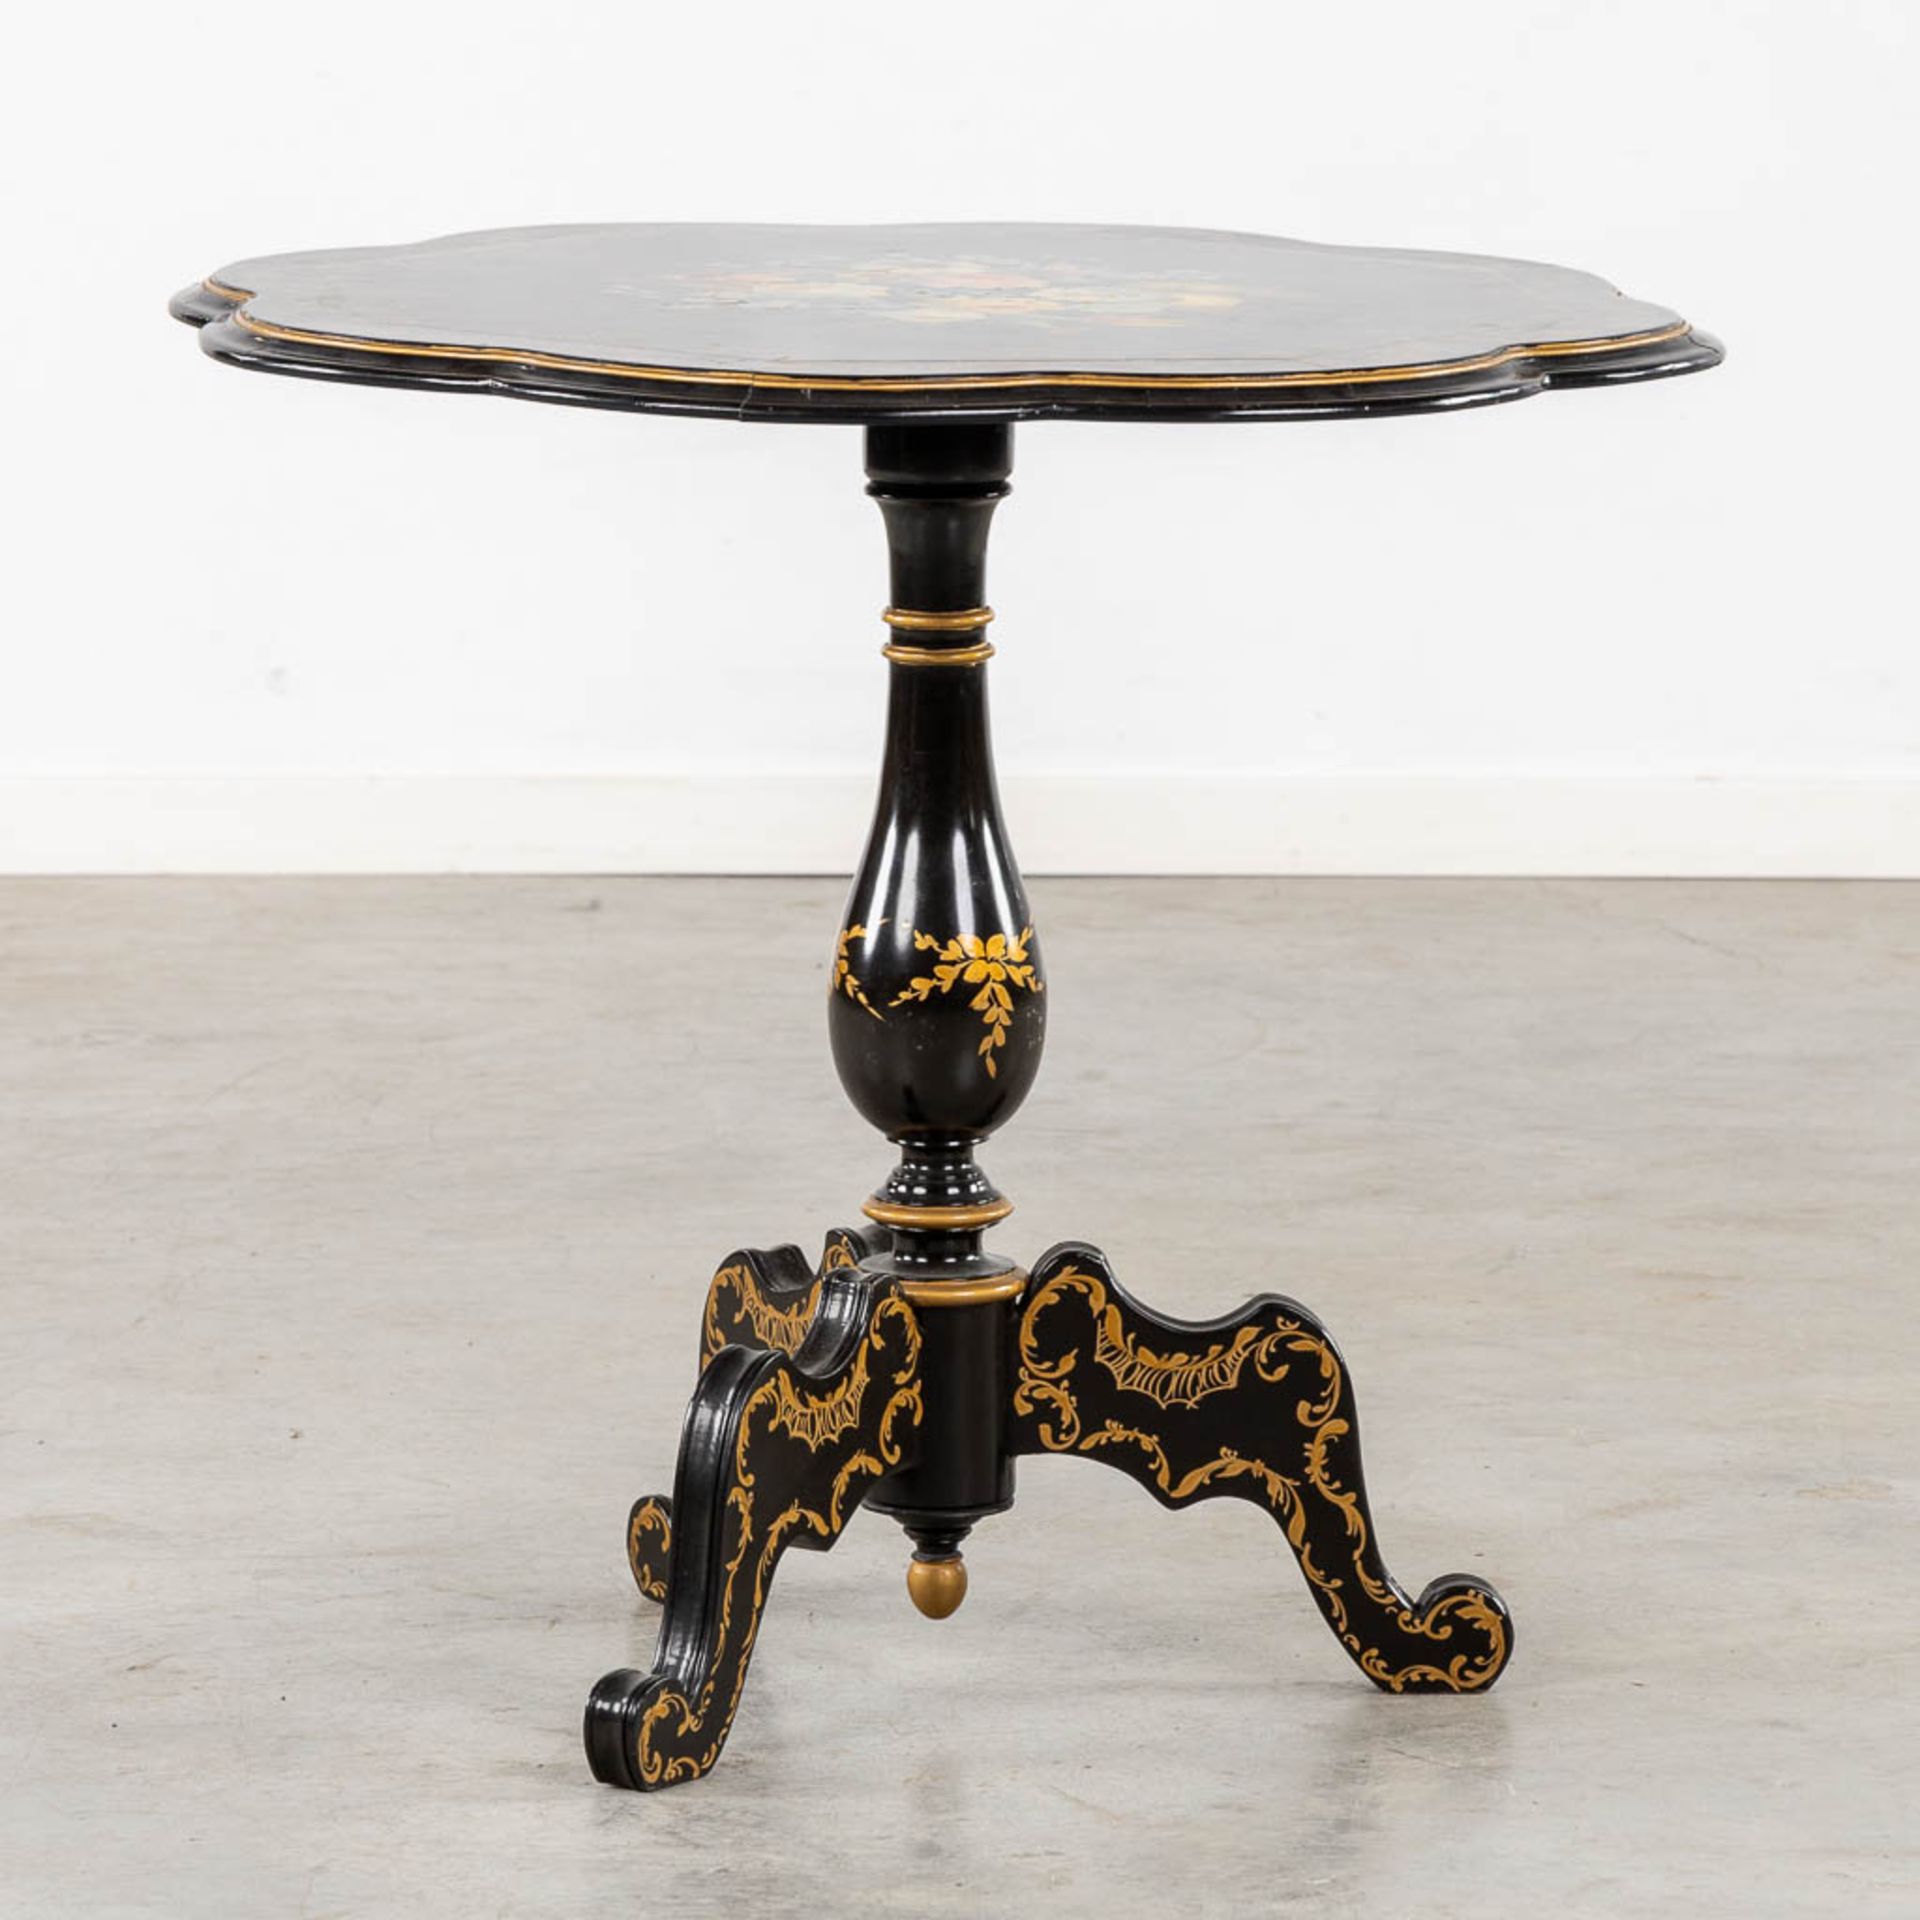 A Tilt-Top table with hand-painted floral decor, Napoleon 3 style. (H:67 x D:72 cm) - Image 3 of 9